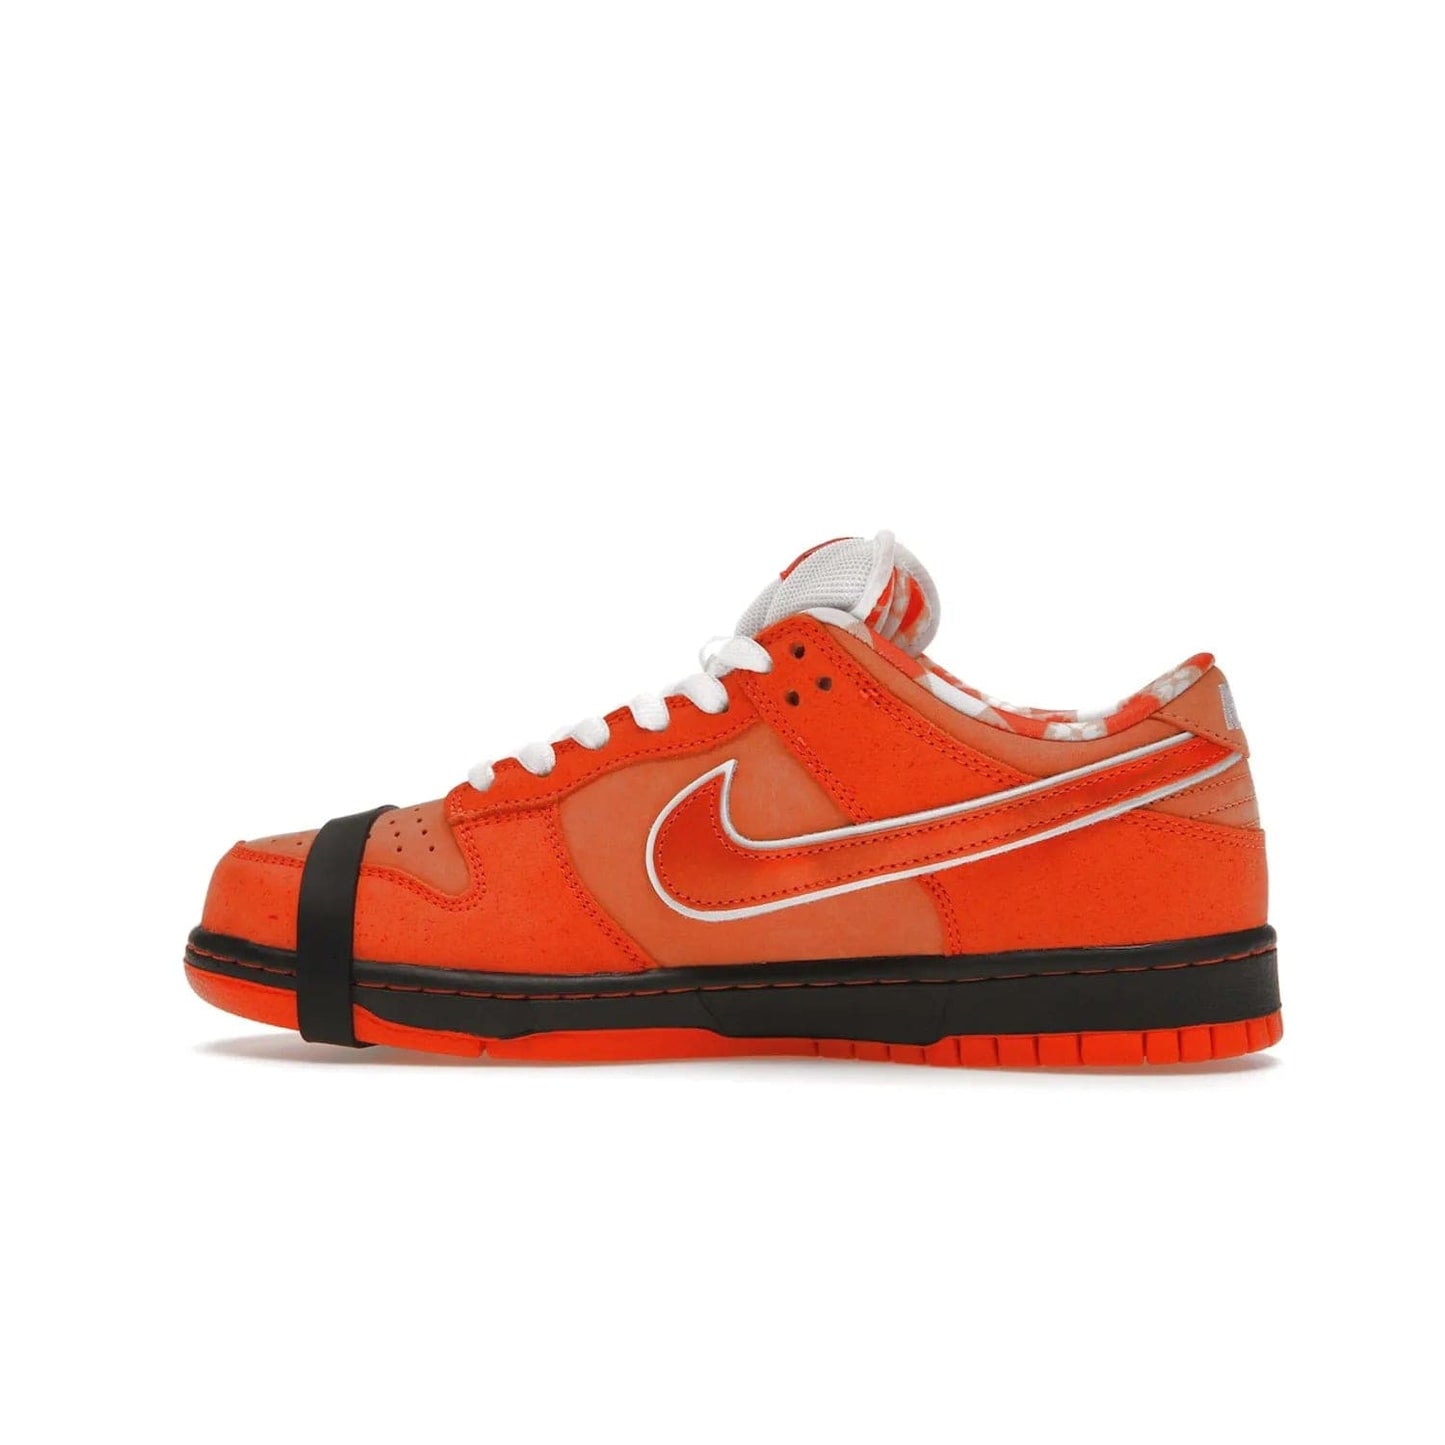 Nike SB Dunk Low Concepts Orange Lobster - Image 20 - Only at www.BallersClubKickz.com - Make a statement with the Nike SB Dunk Low Concepts Orange Lobster. Variety of orange hues, nubuck upper, bib-inspired lining & rubber outsole create bold look & comfortable blend of style. Available December 20th, 2022.